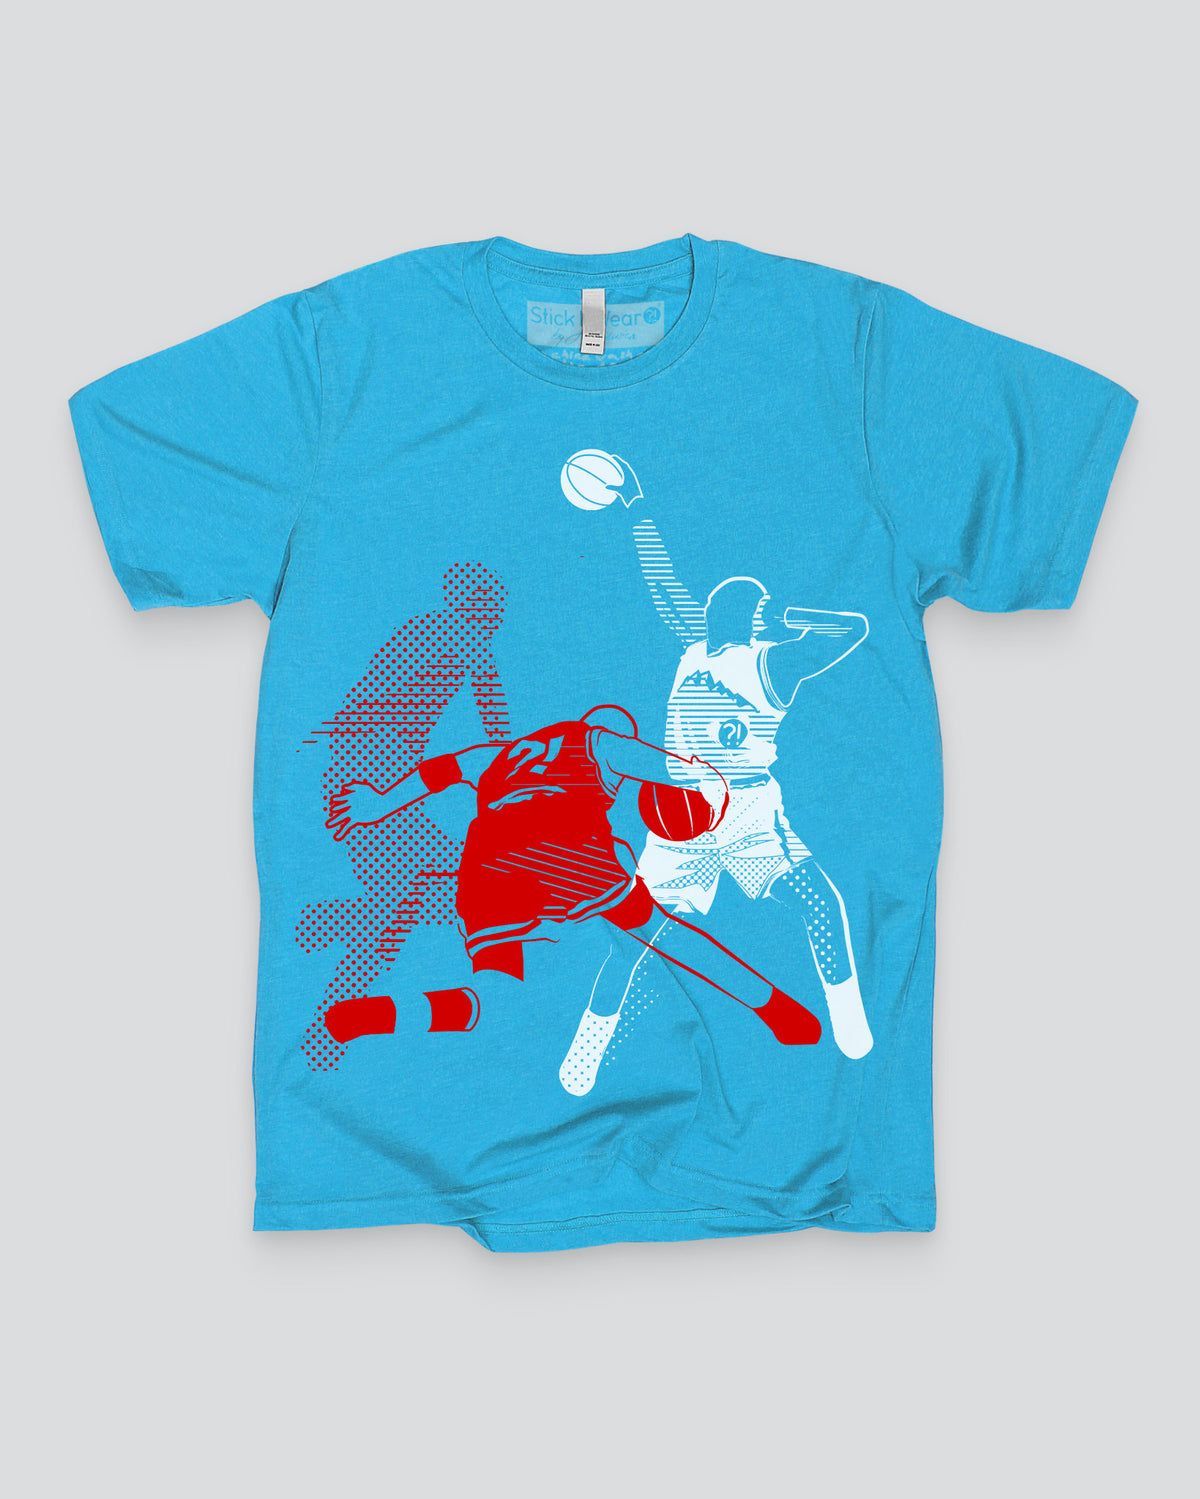 A SPECTACULAR MOVE 06 Basketball Stance T-Shirt